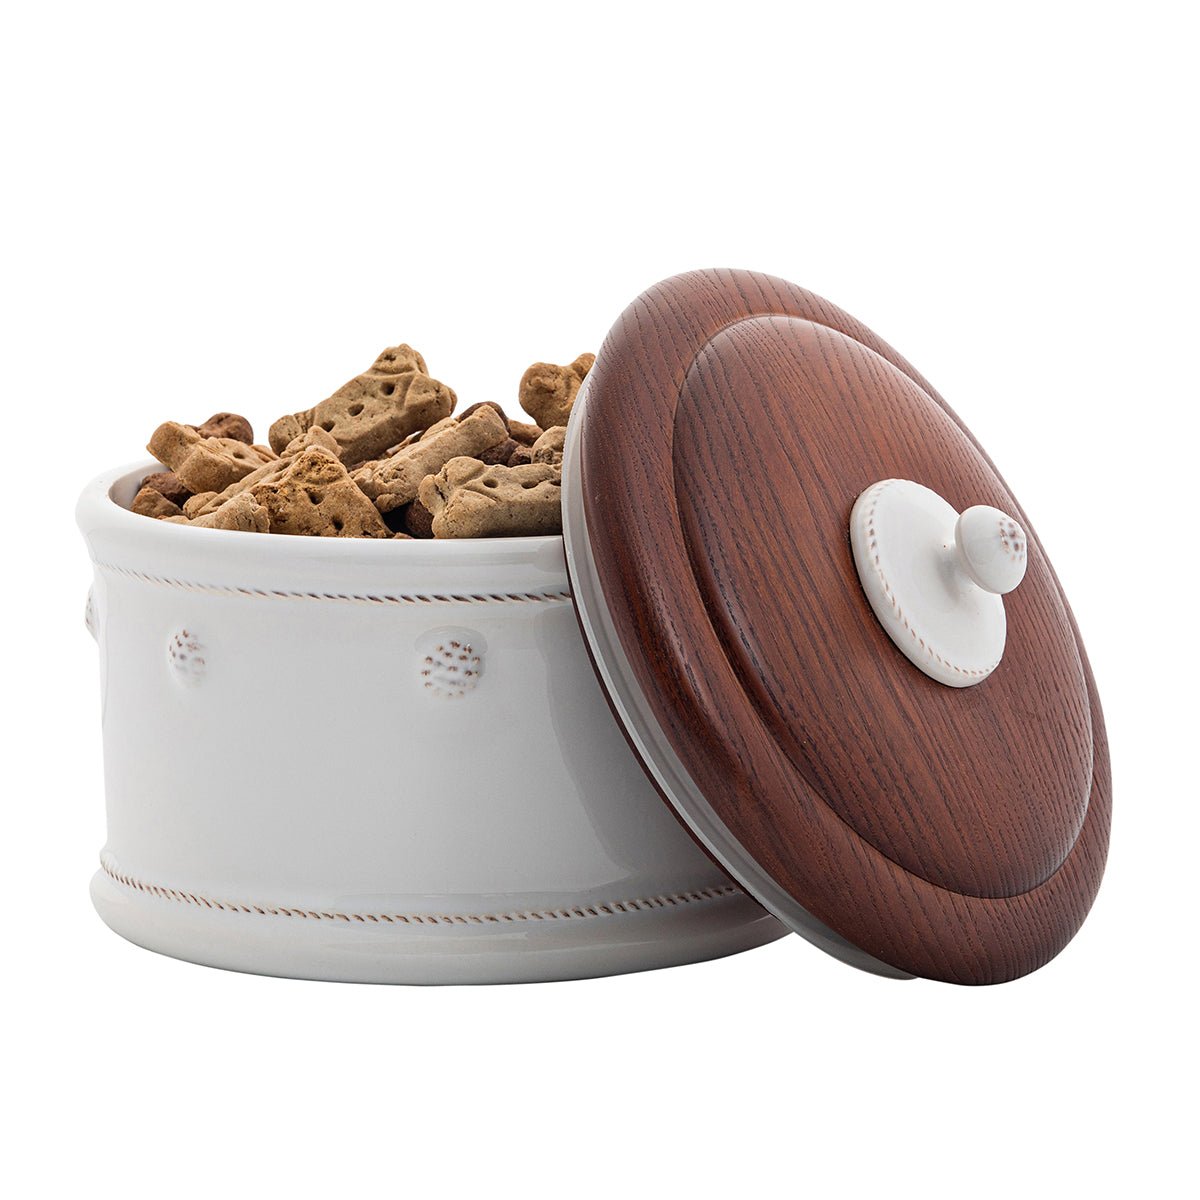 Berry Dog Treat Canister